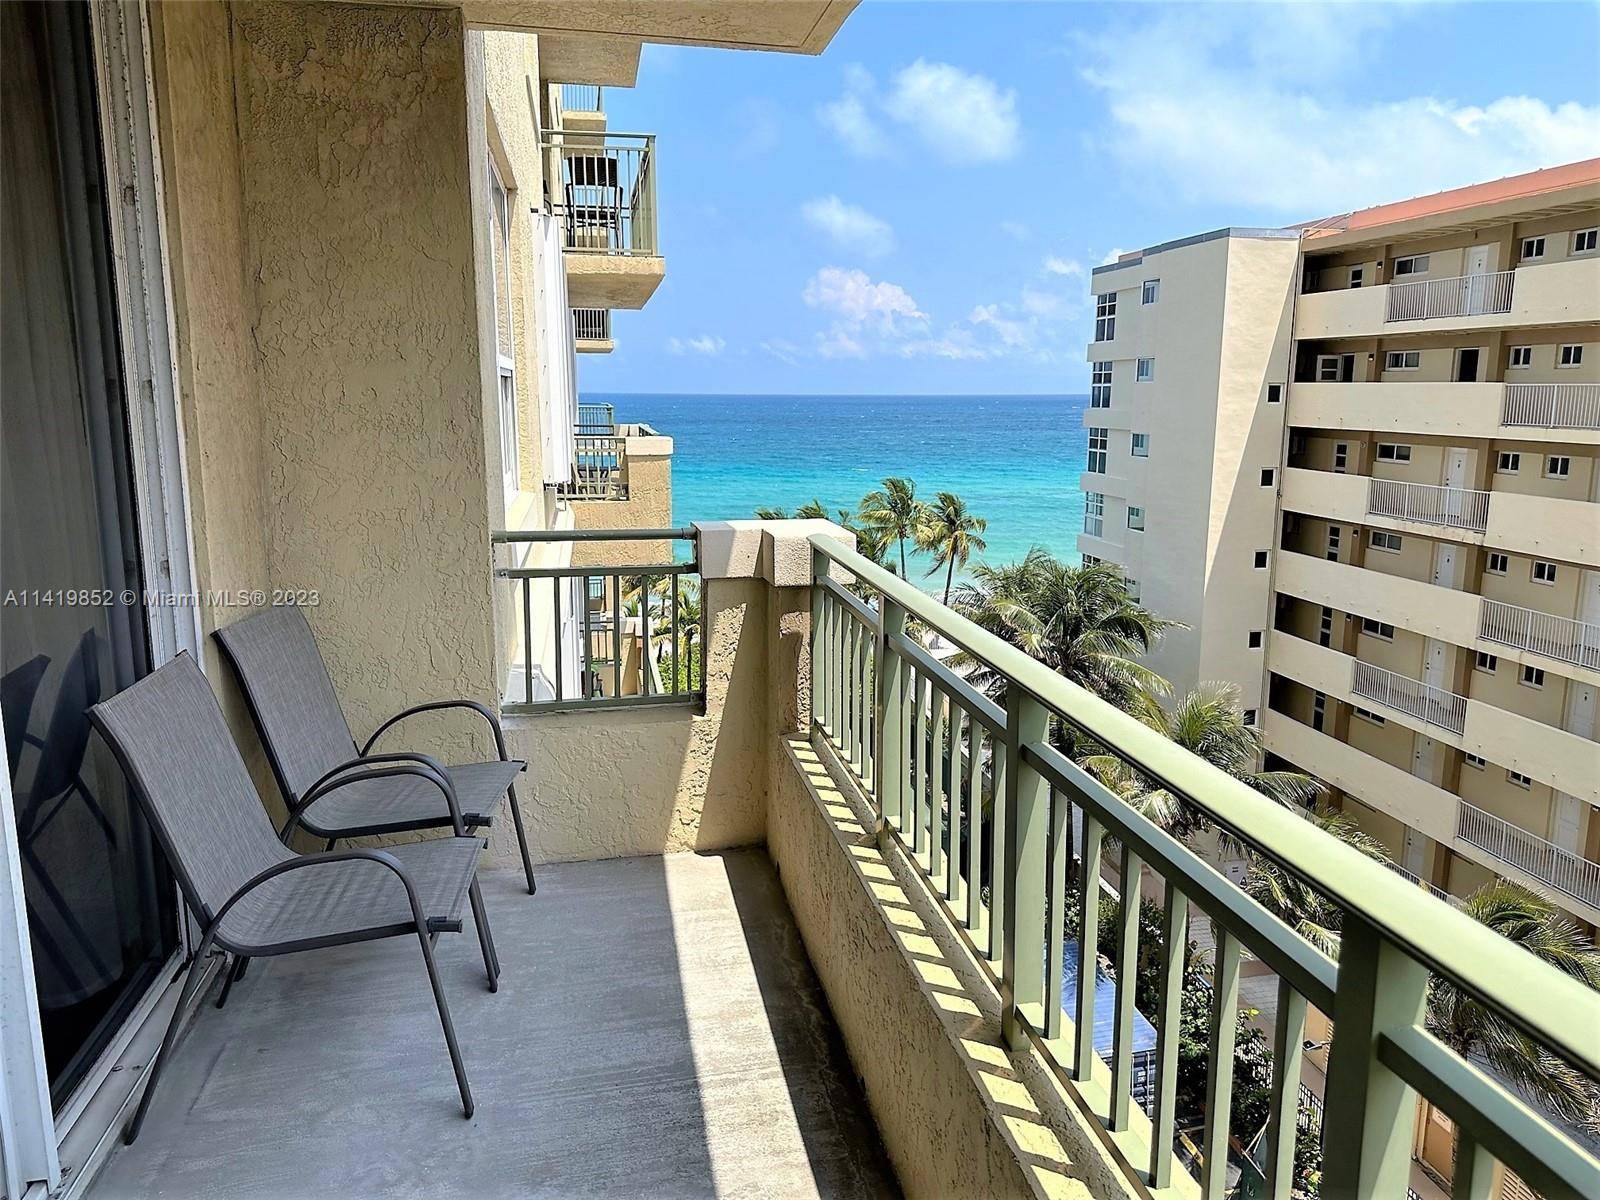 Enjoy the comforts of this upgraded and nicely decorated unit at 2080 Ocean Drive.